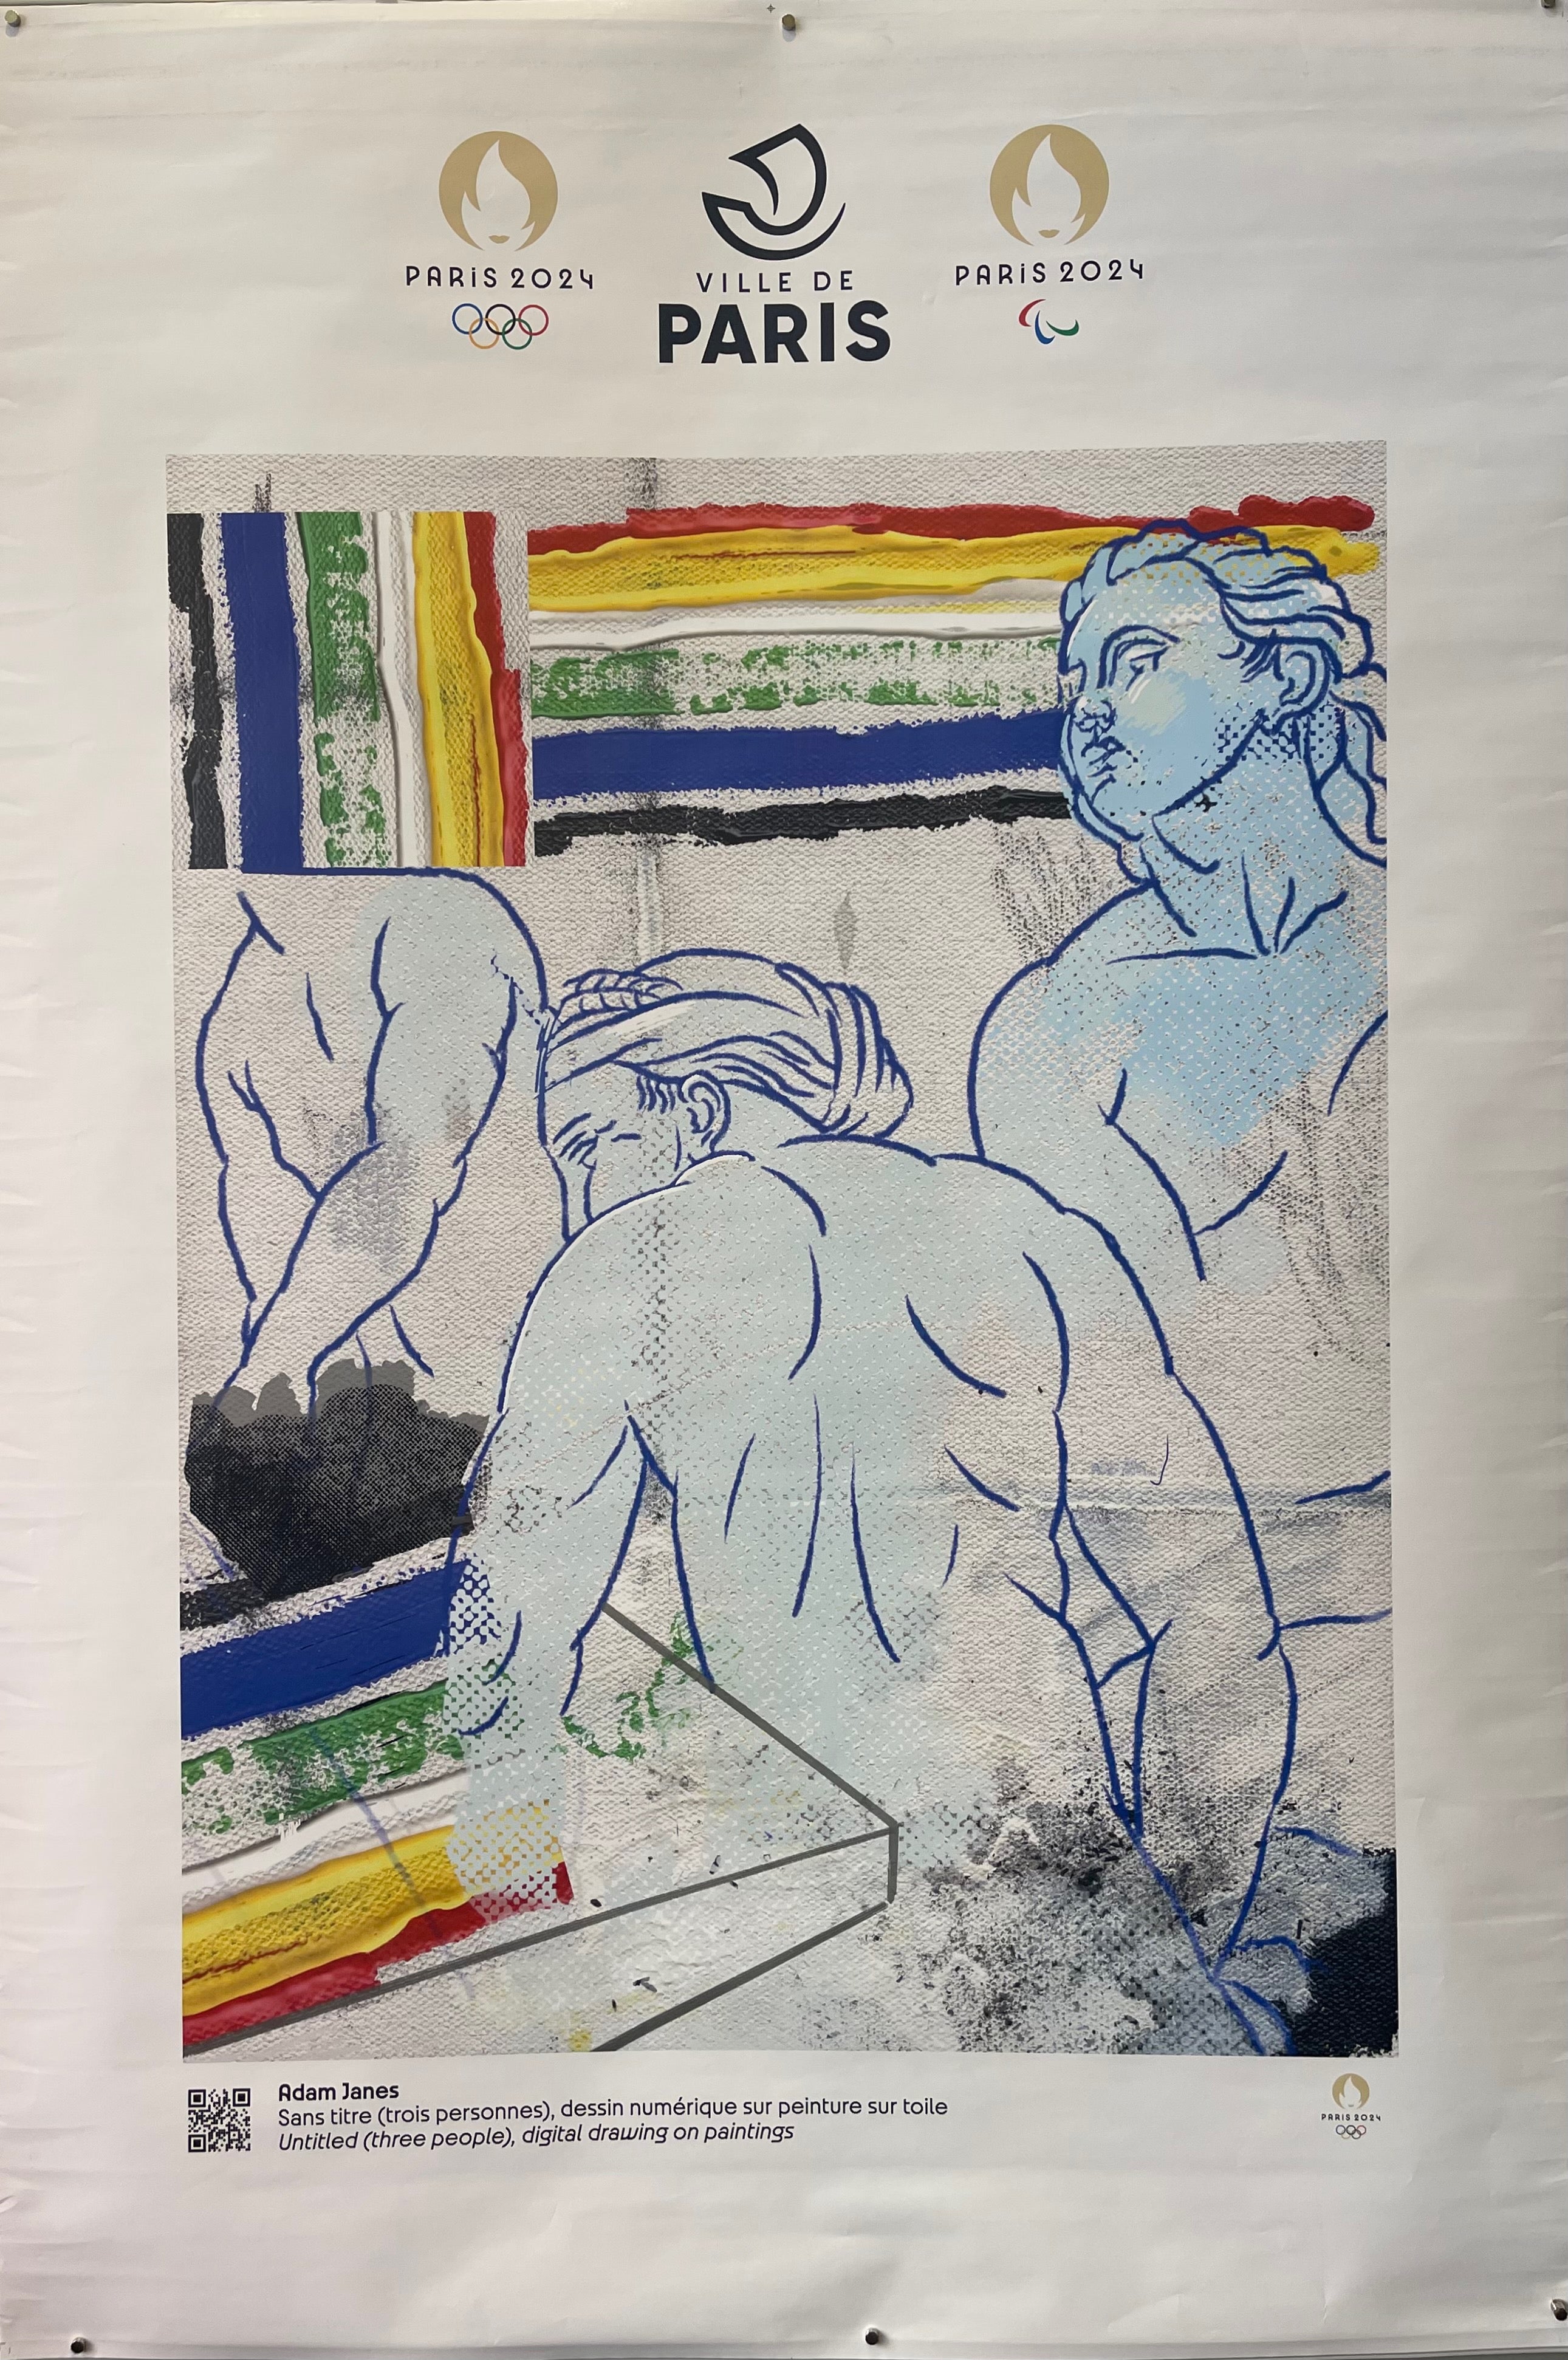 70x47 french 2024 olympics cultural olympiad poster featuring three figures in greek roman statue style with paint stripes